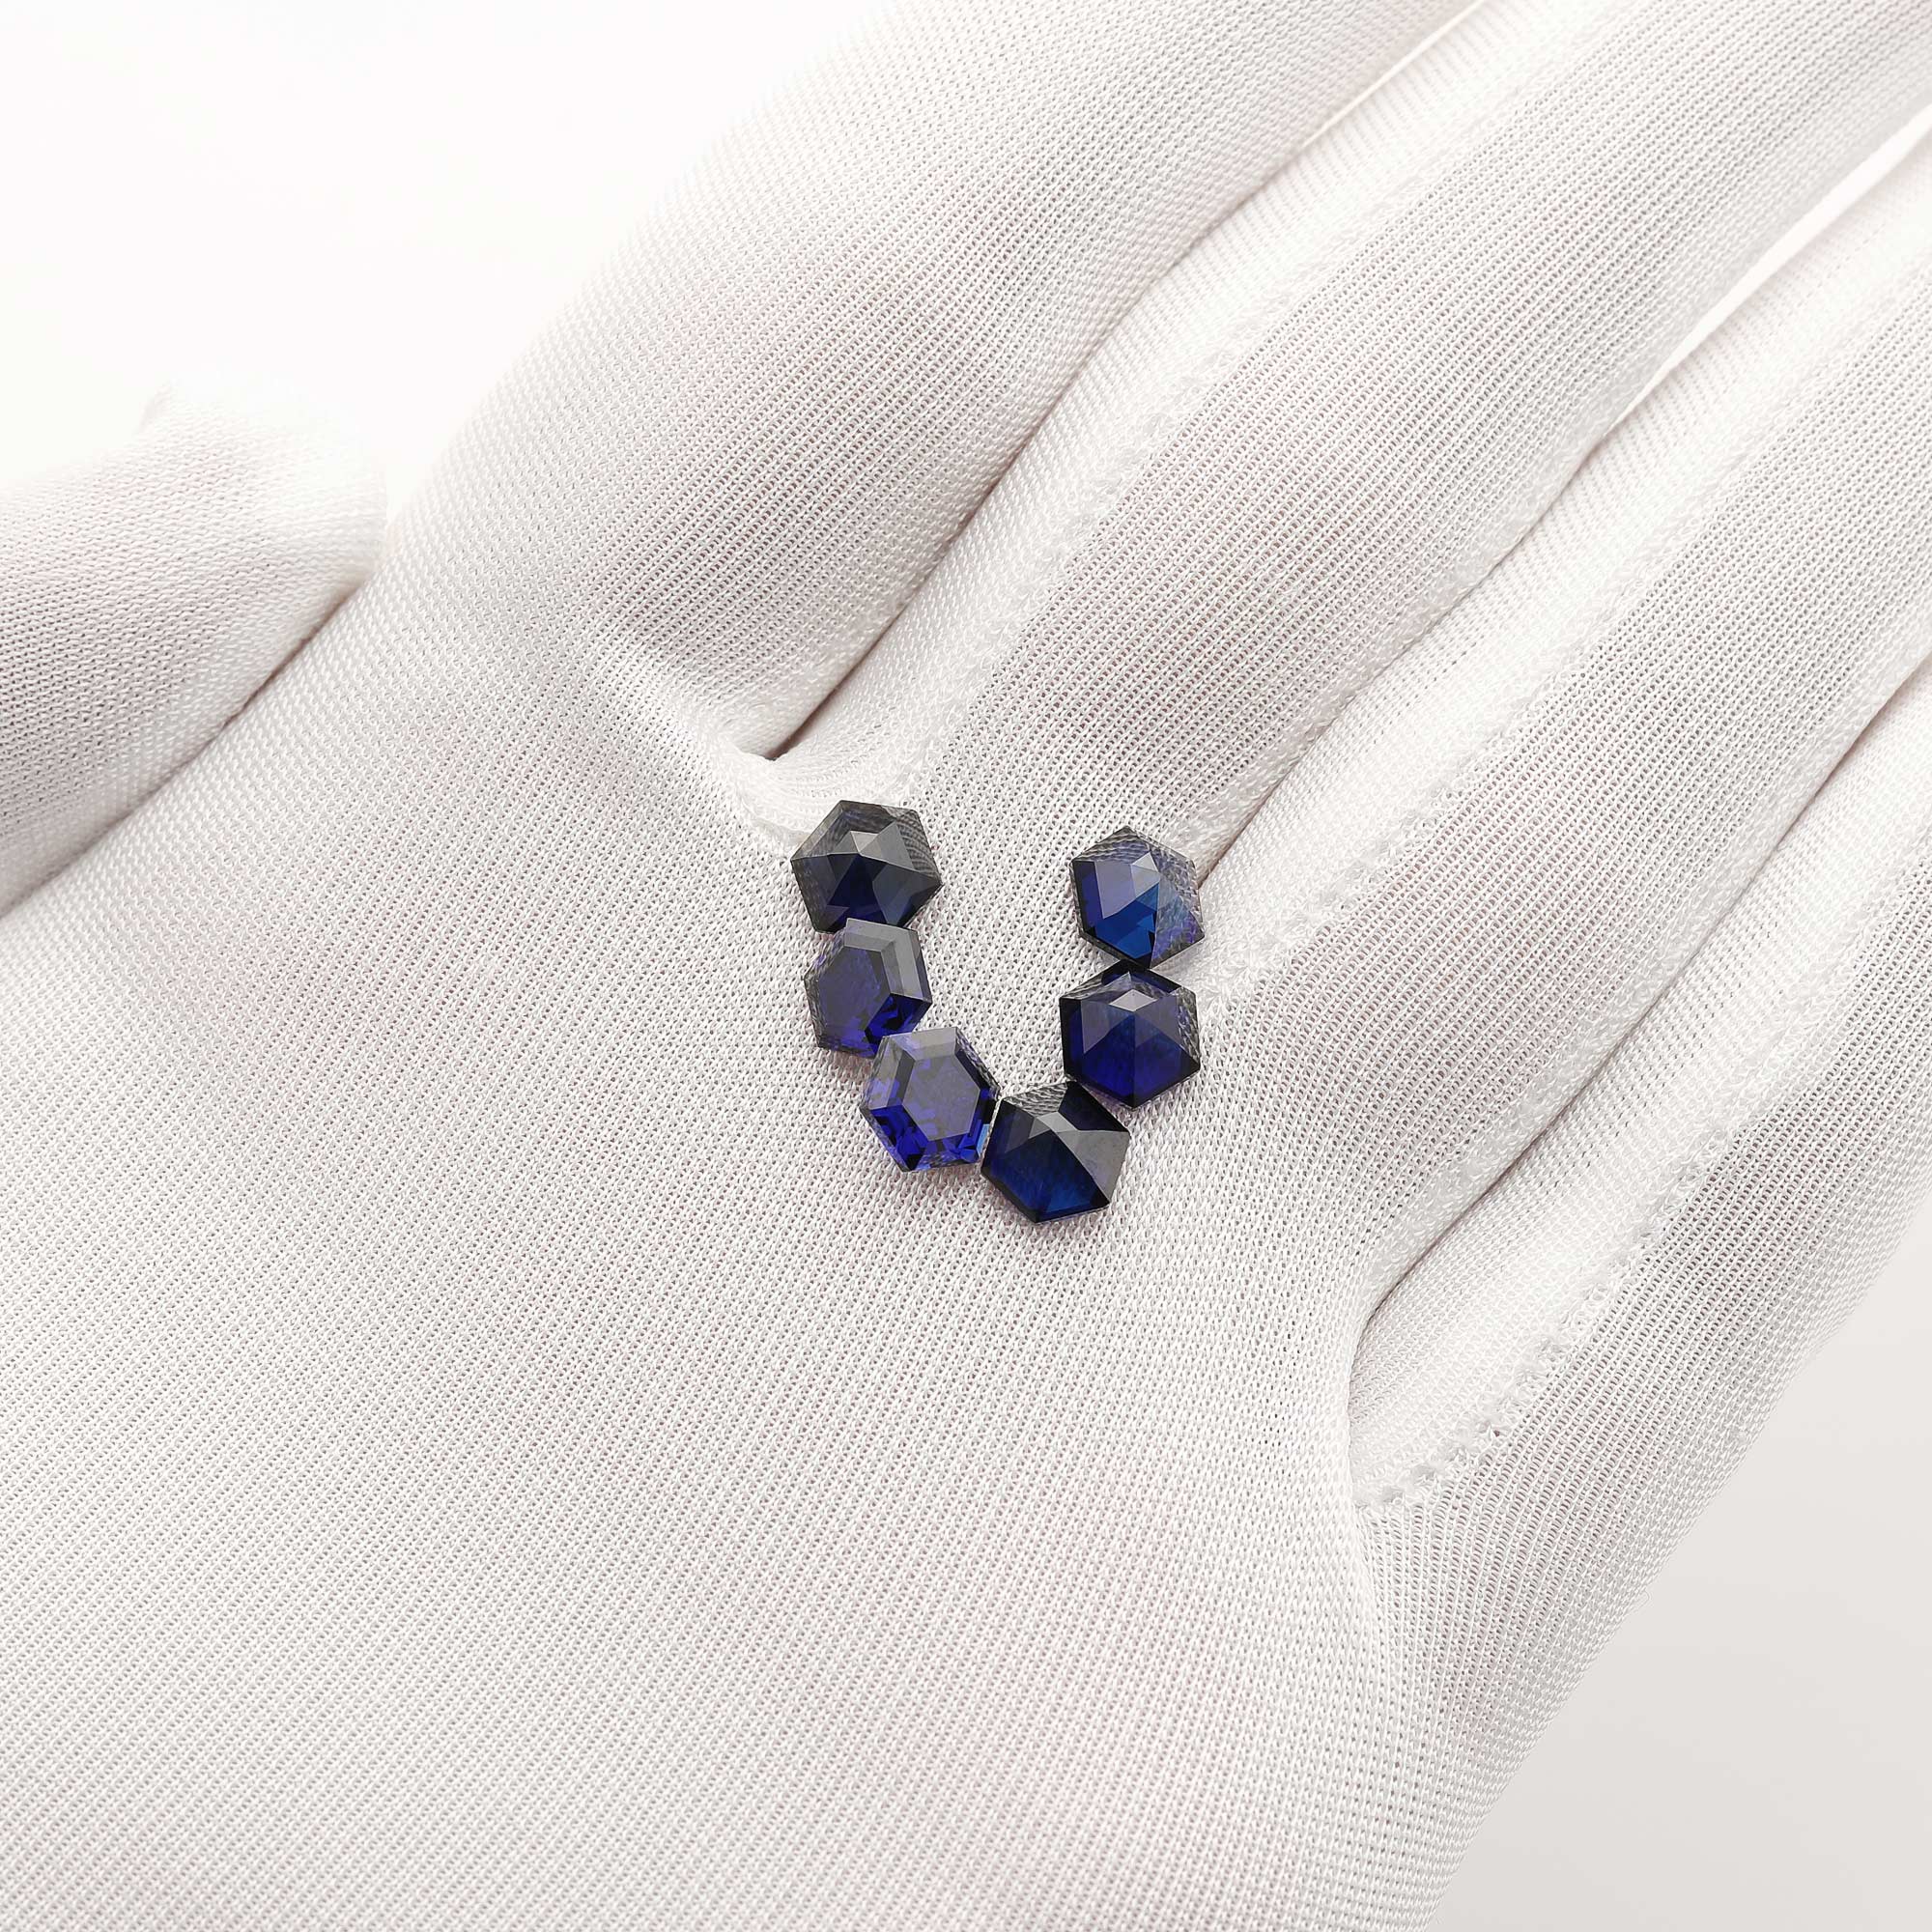 1Pcs Hexagon Cut Sapphire Faceted Stone Lab Created,September Birthstone,Deep Blue Faceted Loose Gemstone,DIY Jewelry Supplies 4160062 - Click Image to Close